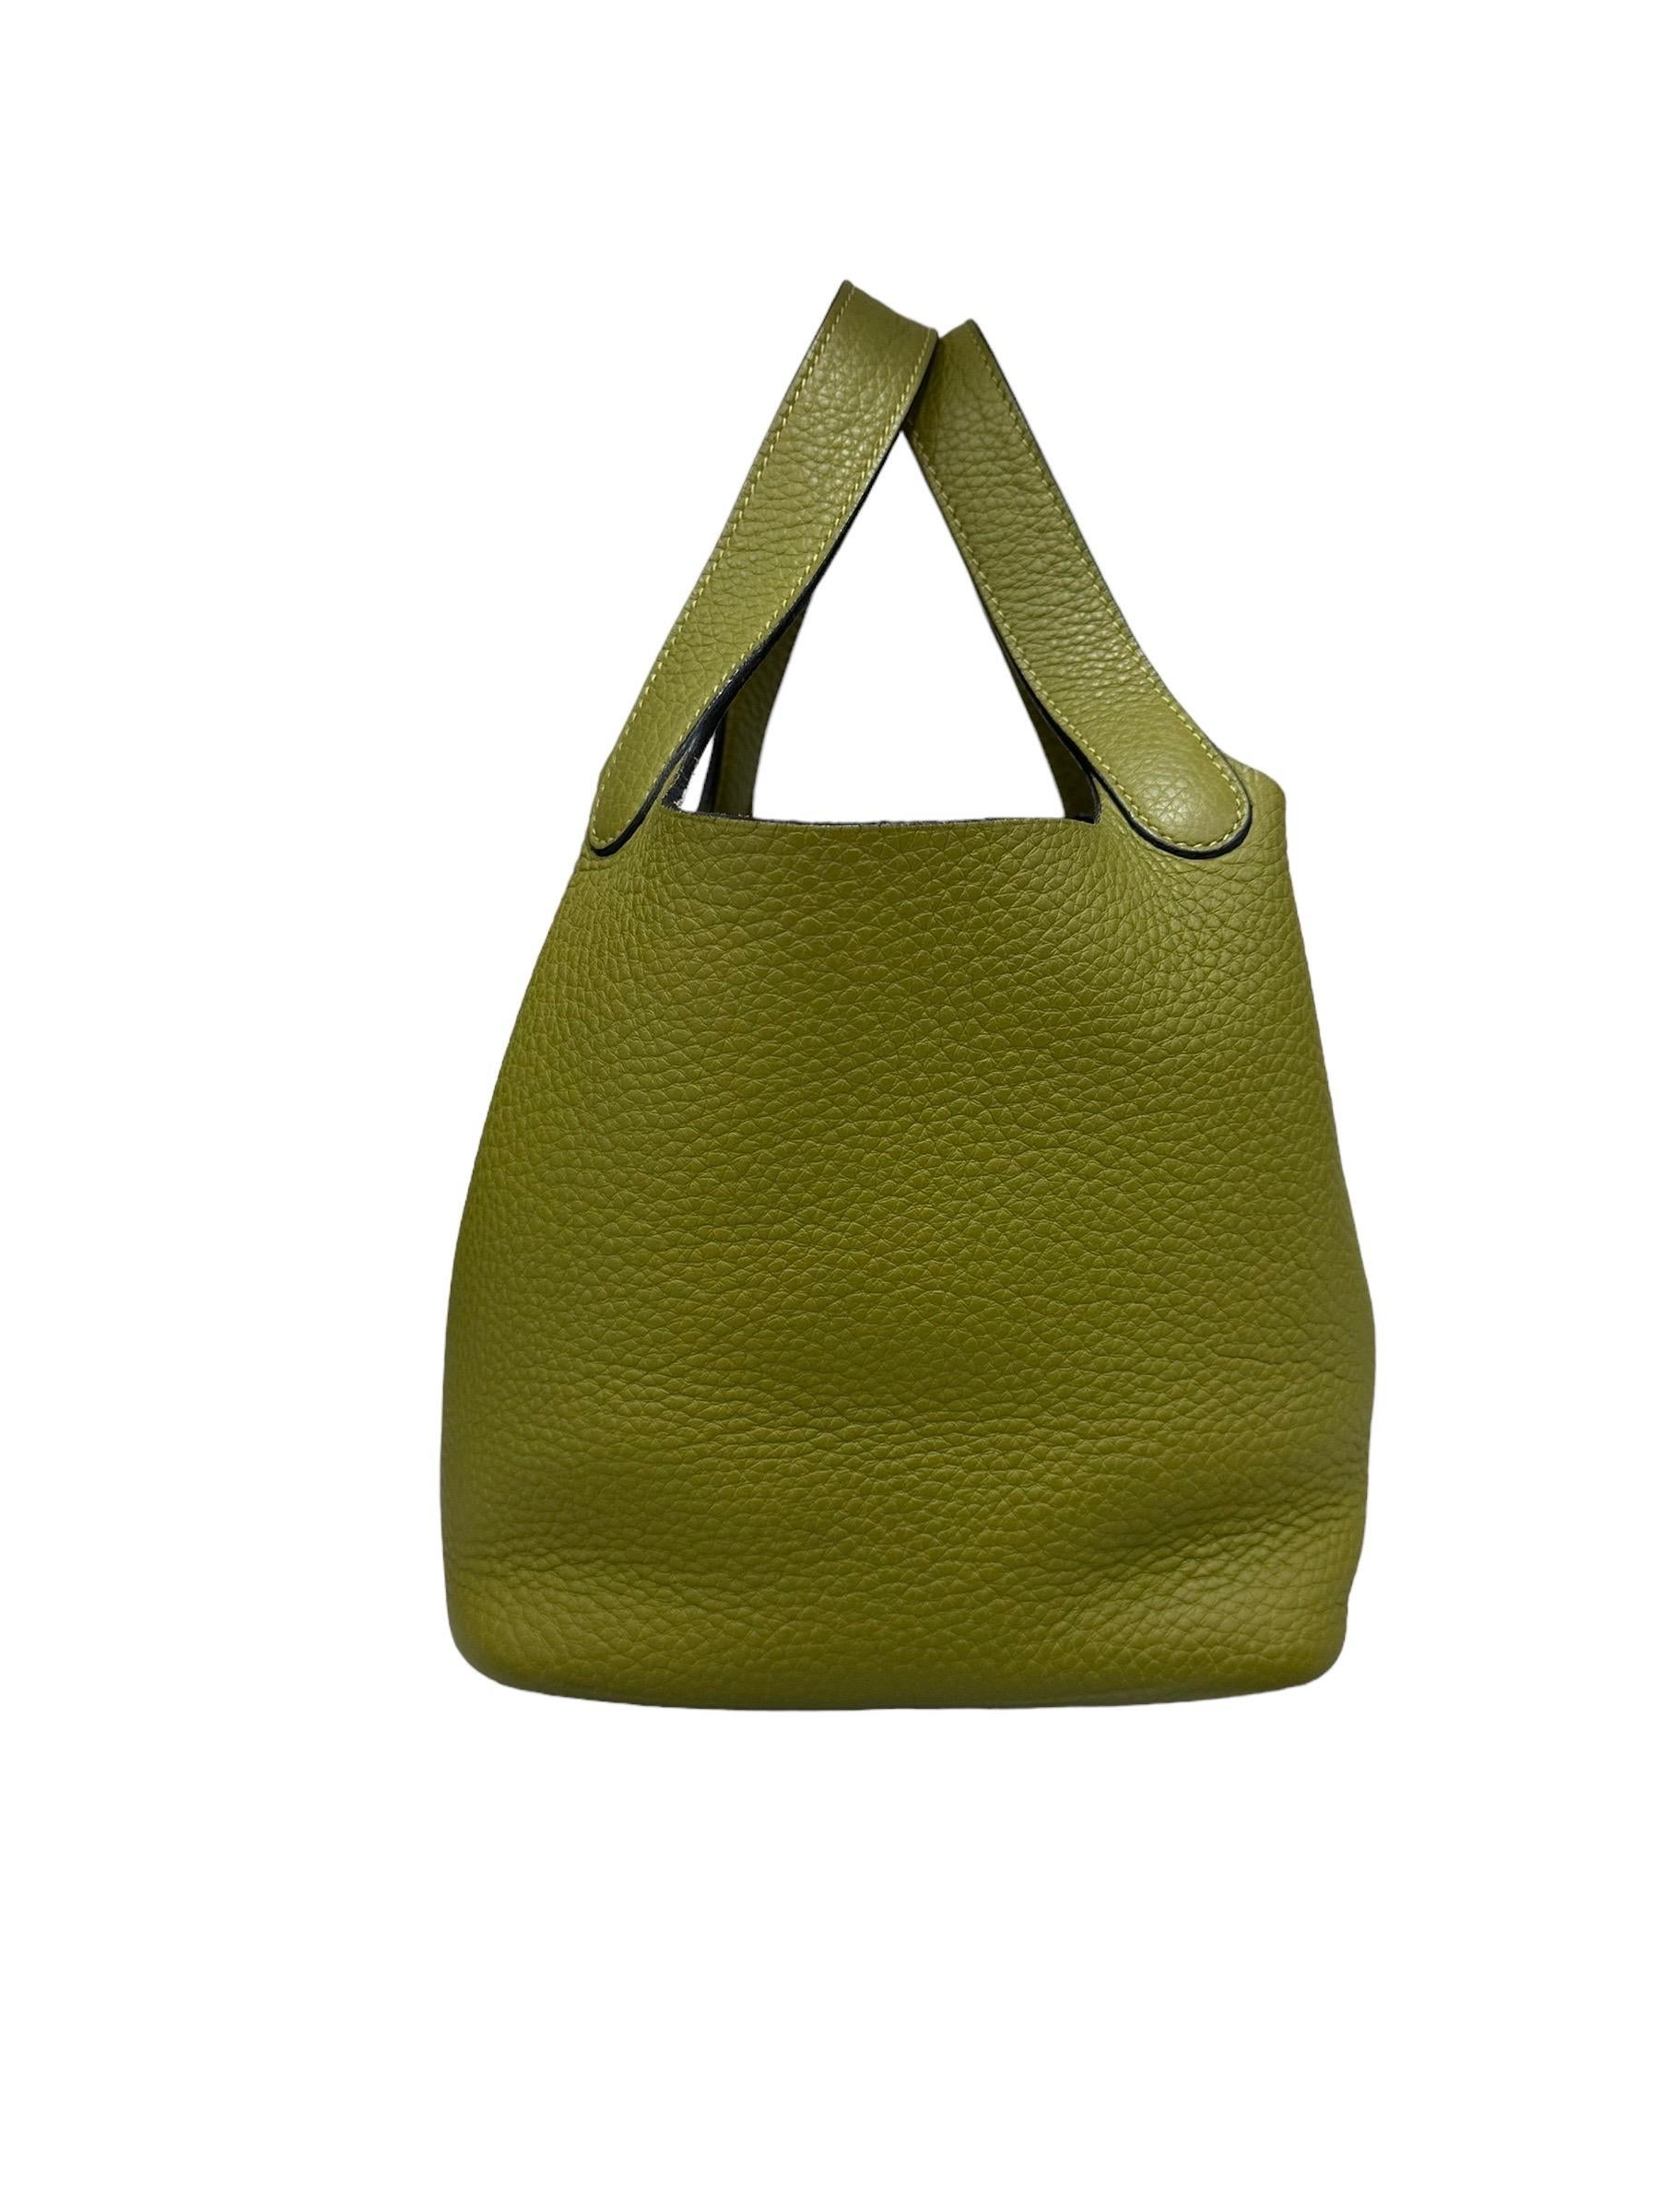 Hermès Picotin 18 Cleamence Leather Vert Anis Top Handle Bag In Excellent Condition For Sale In Torre Del Greco, IT